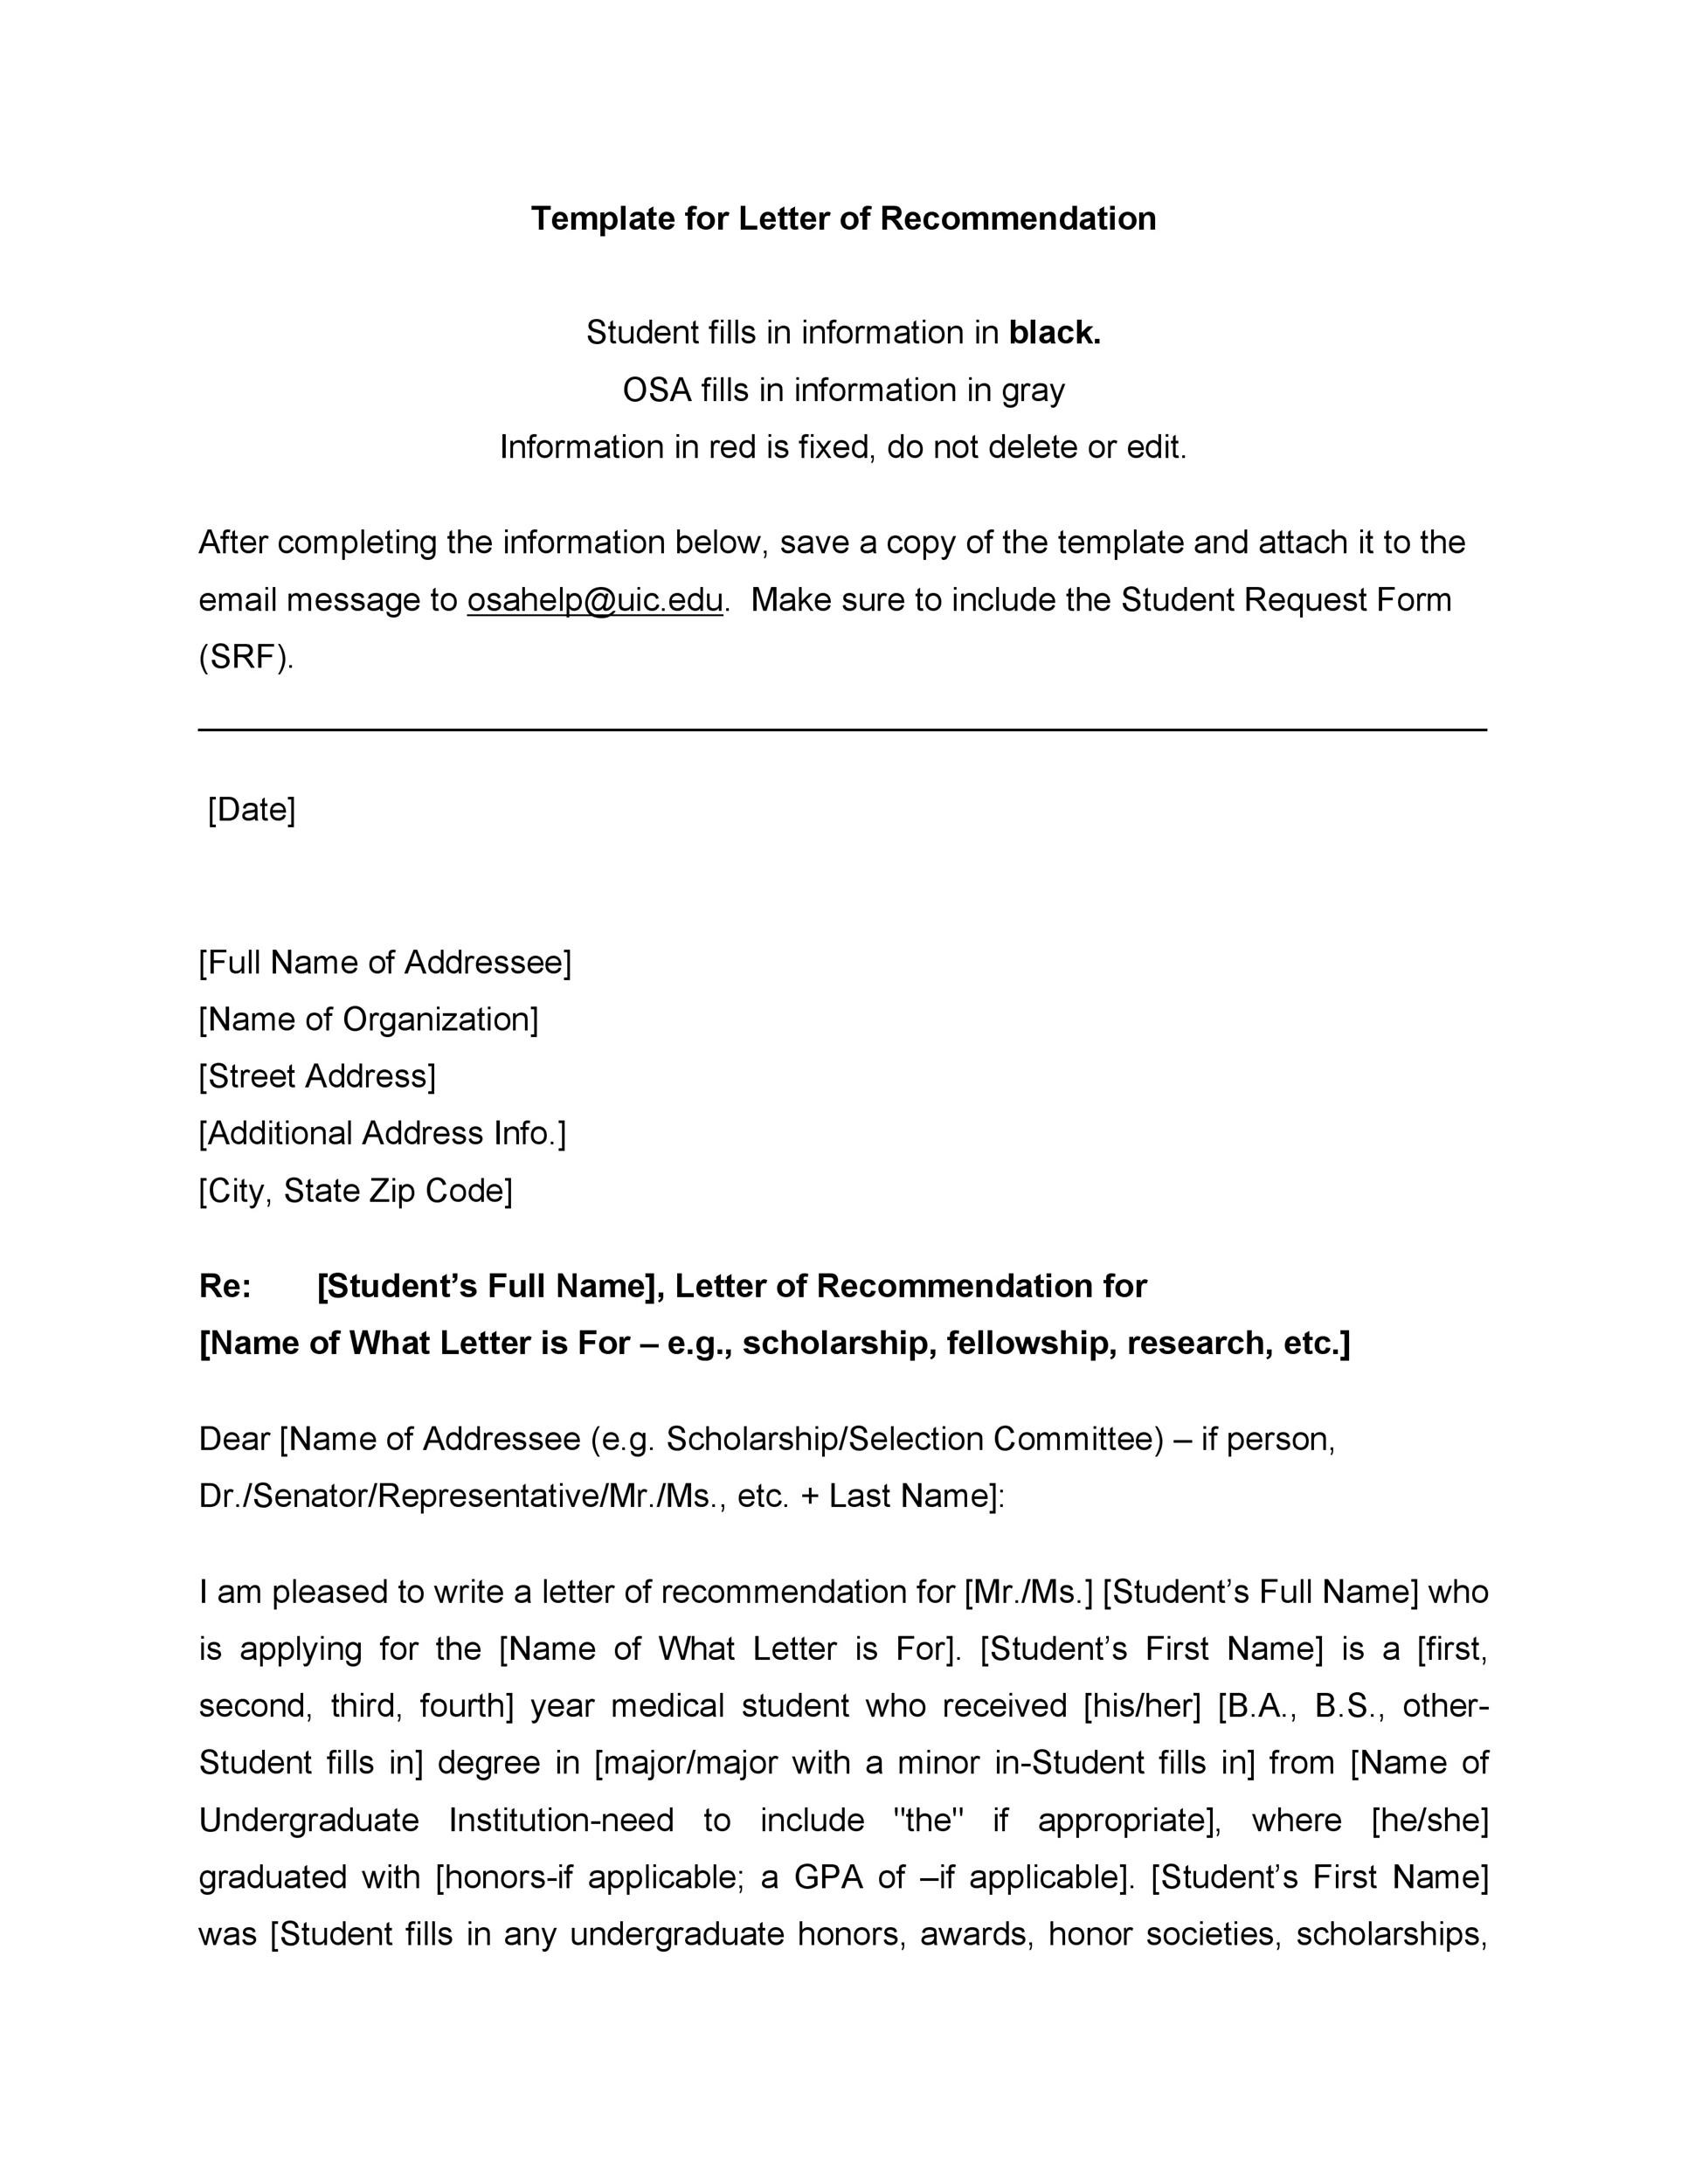 Scholarship Letter Of Recommendation Format from templatelab.com